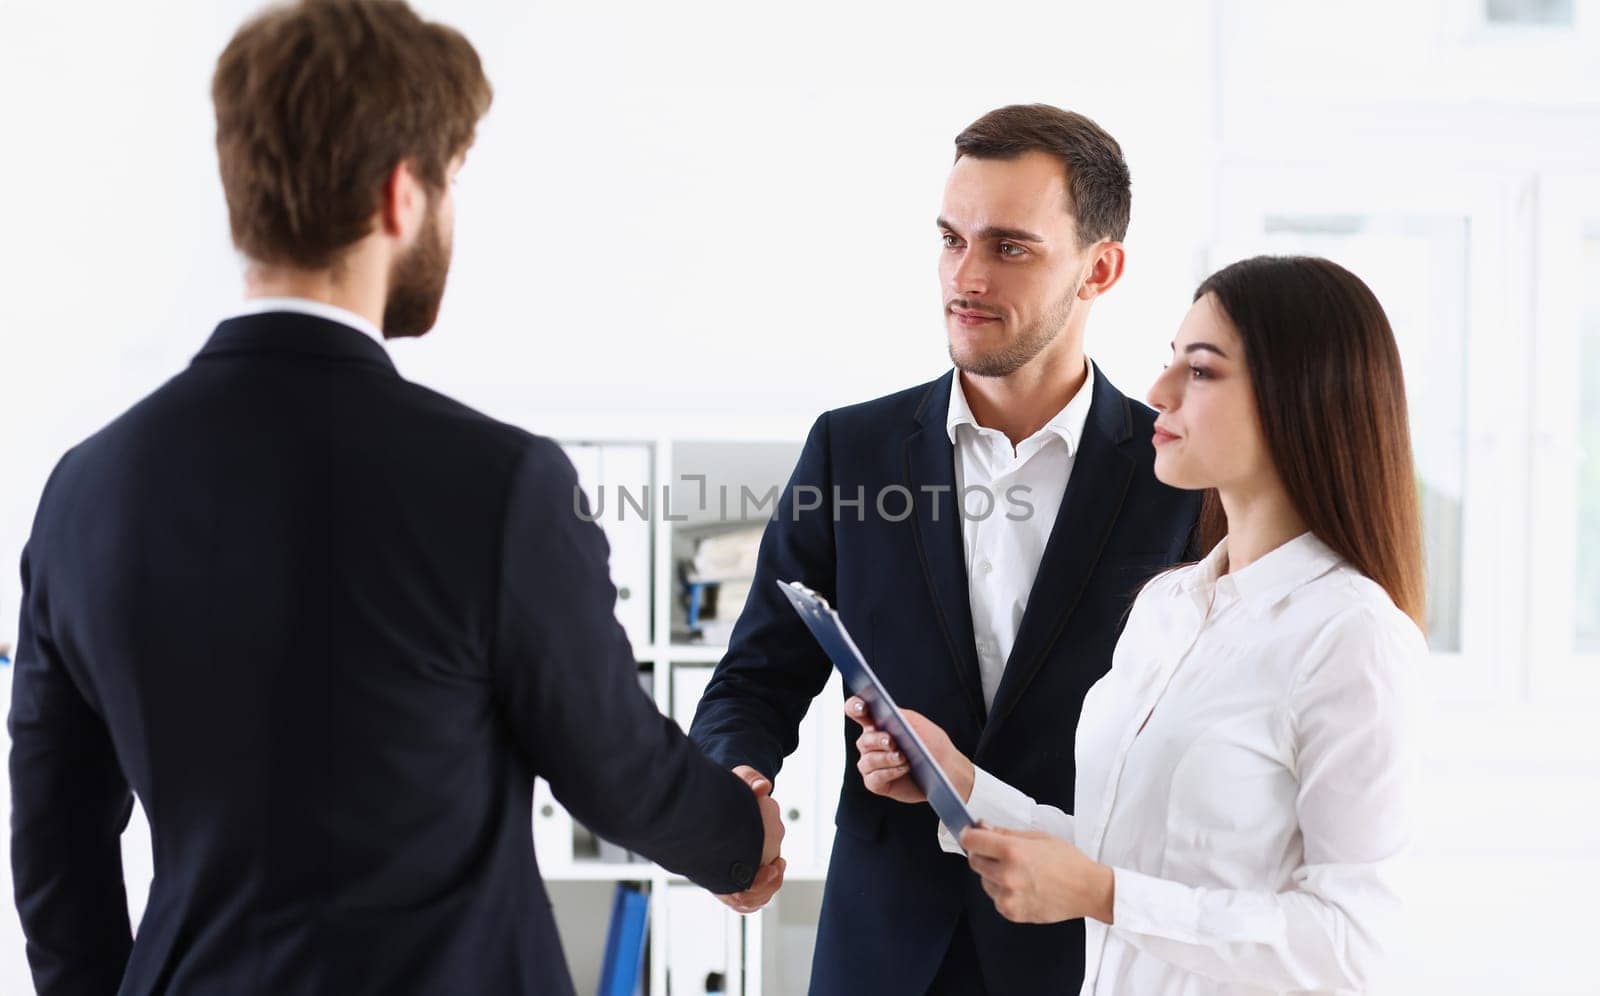 Escort service interpreter works with the transaction accompanies documents conclusion of the contract important situation. Arab businessman and his translator welcome business partner and says hello